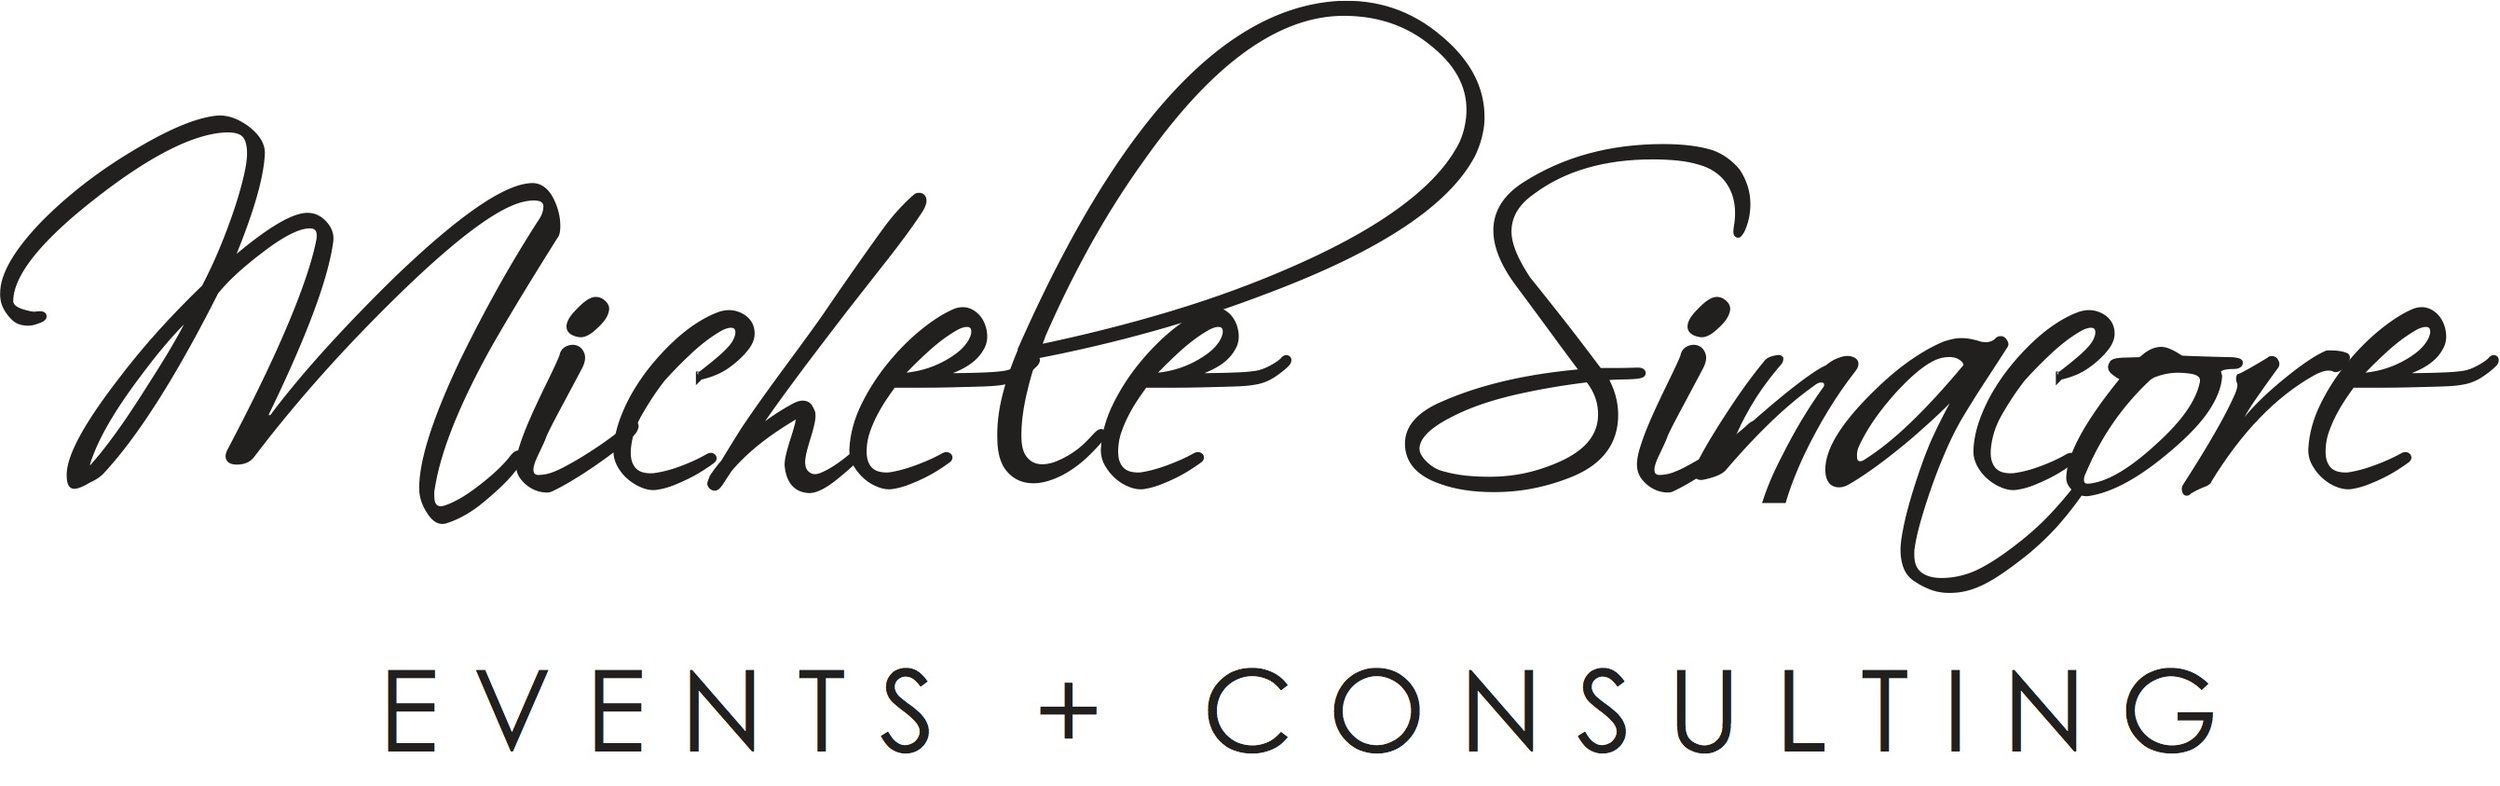 michele sinacore events + consulting